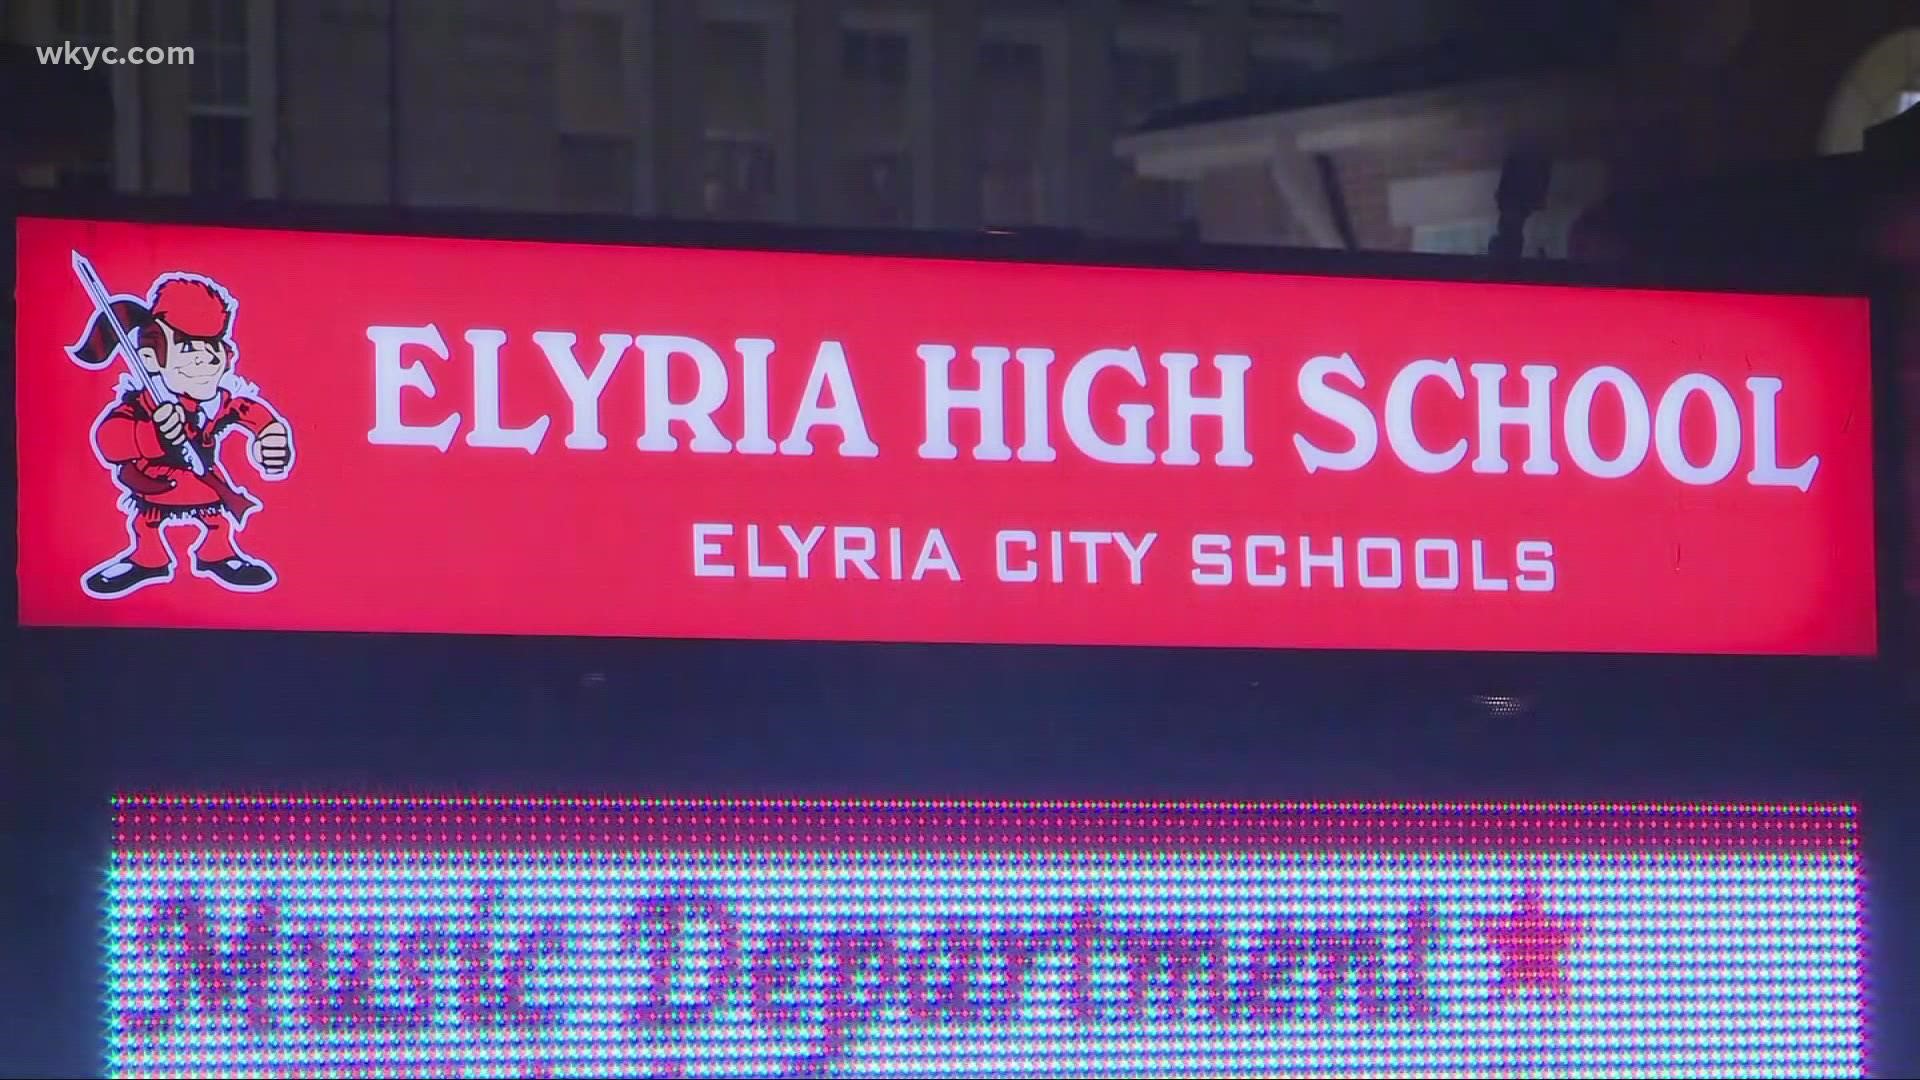 A student was arrested for making a threat to Berea-Midpark Middle School on Friday, while Elyria High School was placed on lockdown.